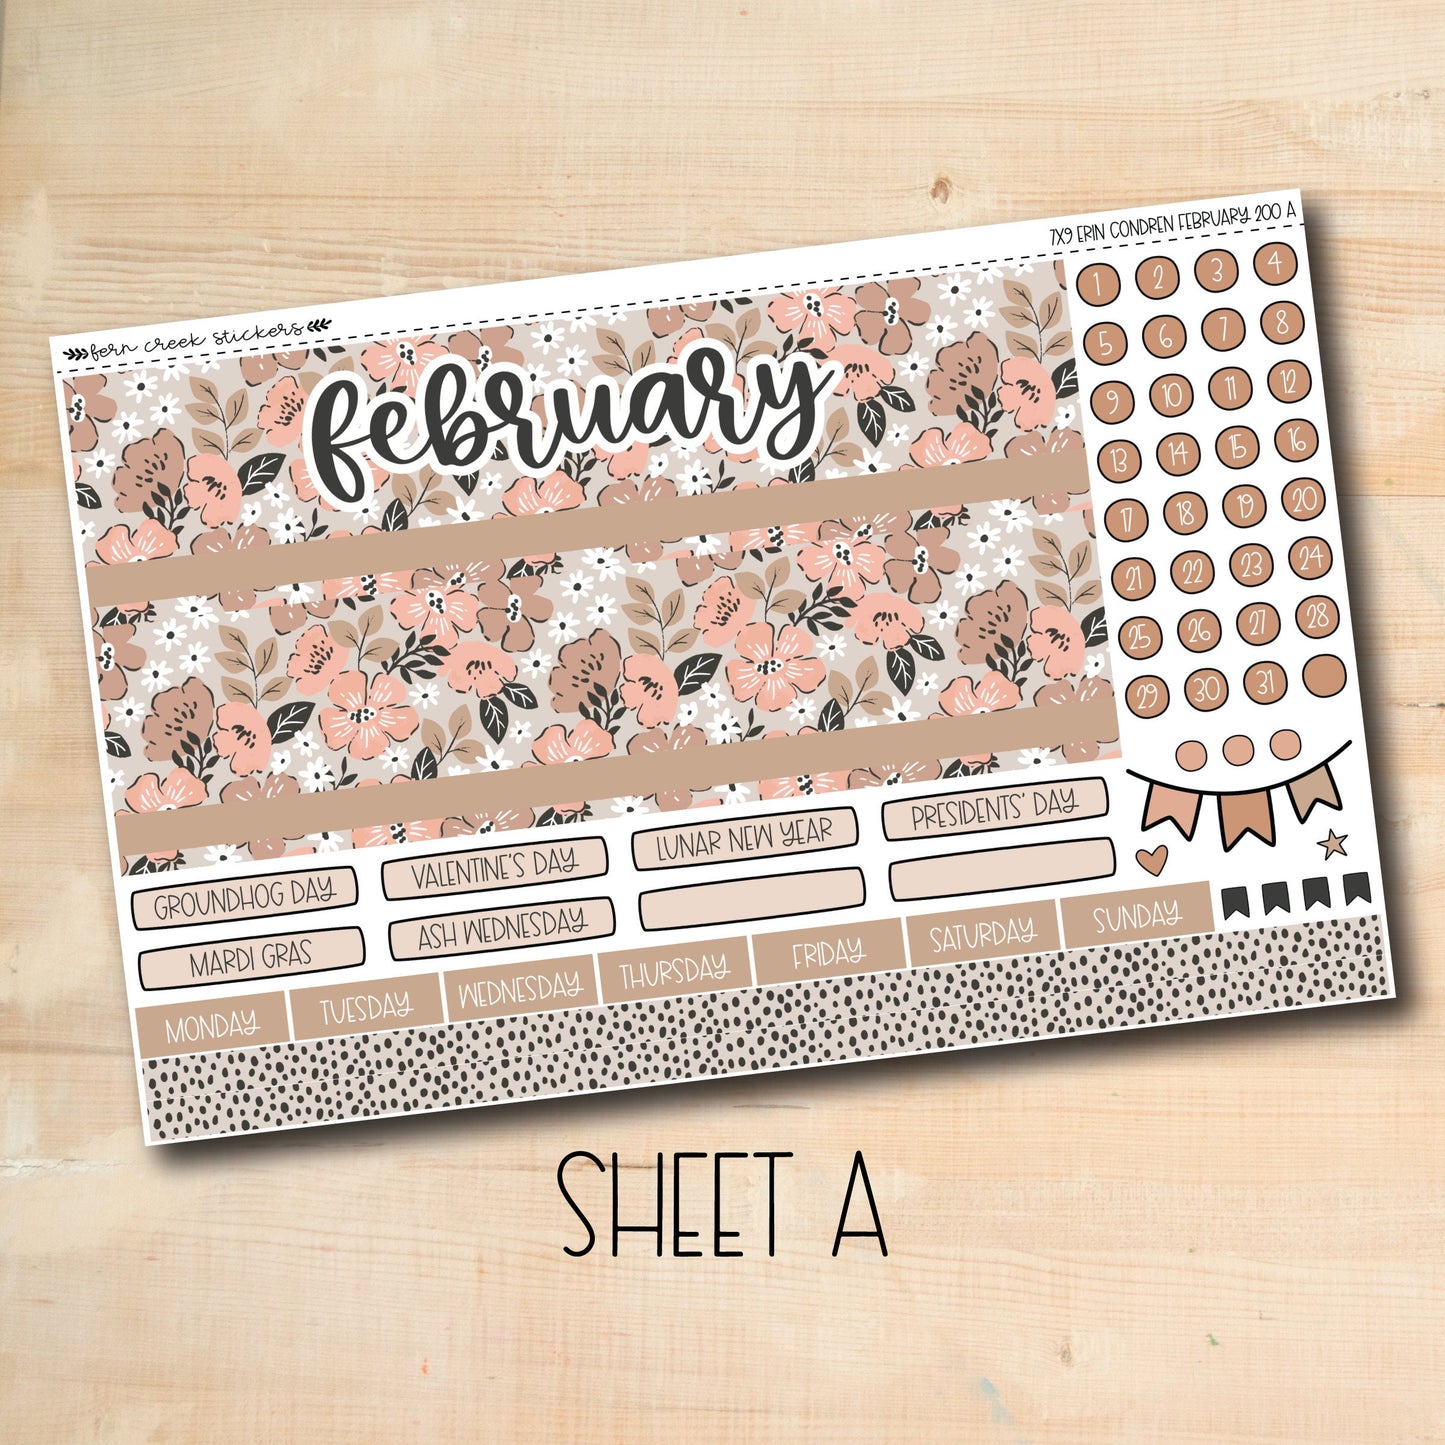 a sticker sheet with a floral pattern on it